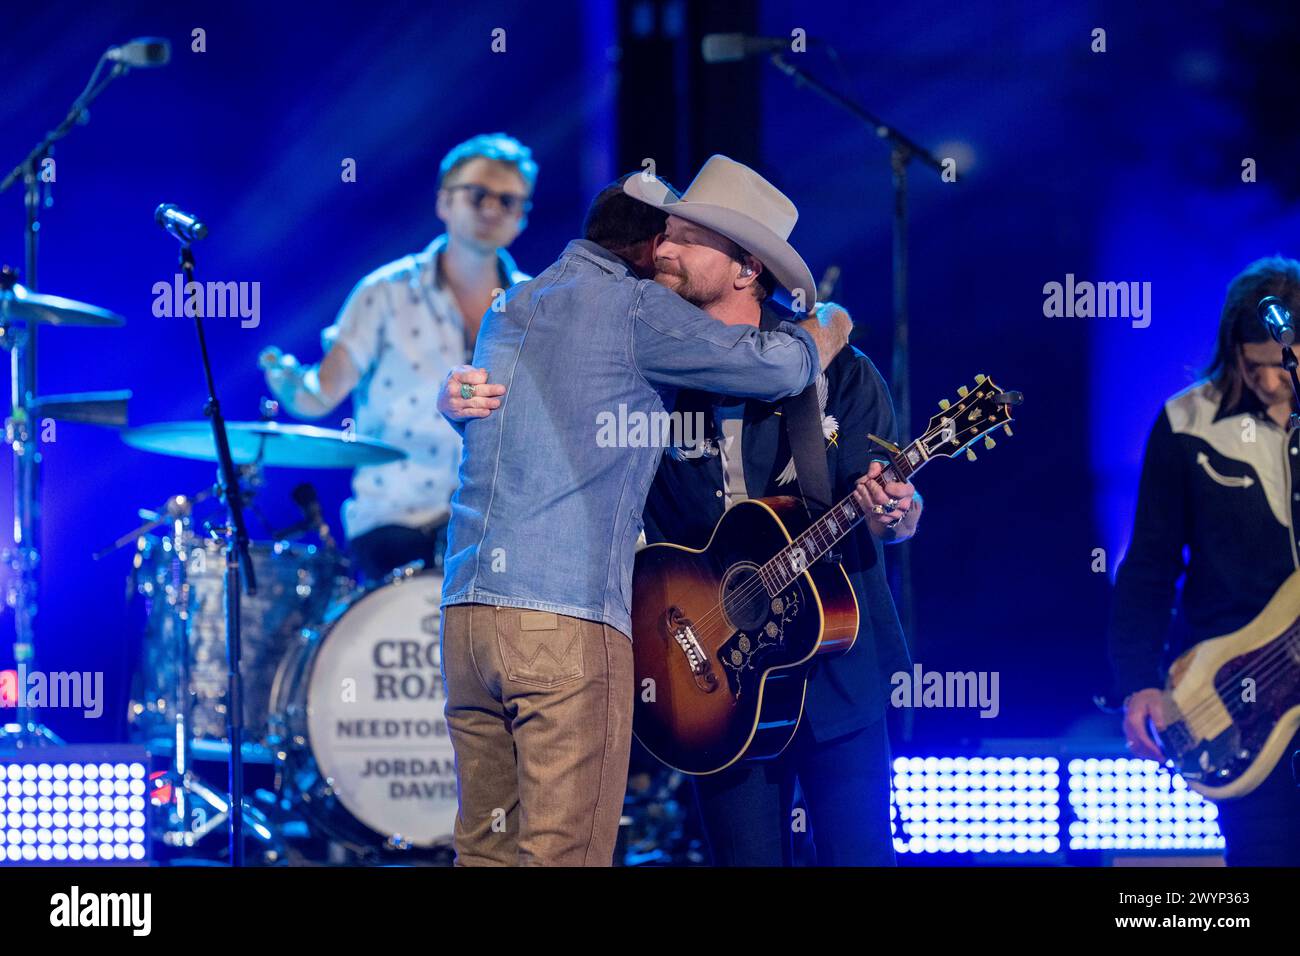 American country rock band NEEDTOBREATHE with lead singer BEAR RINEHART (wearing cowboy hat) teams up with country pop singer JORDAN DAVIS ( in blue shirt) at a taping of CMT Country Crossroads on the University of Texas campus on April 5, 2024. Credit: Bob Daemmrich/Alamy Live News Stock Photo